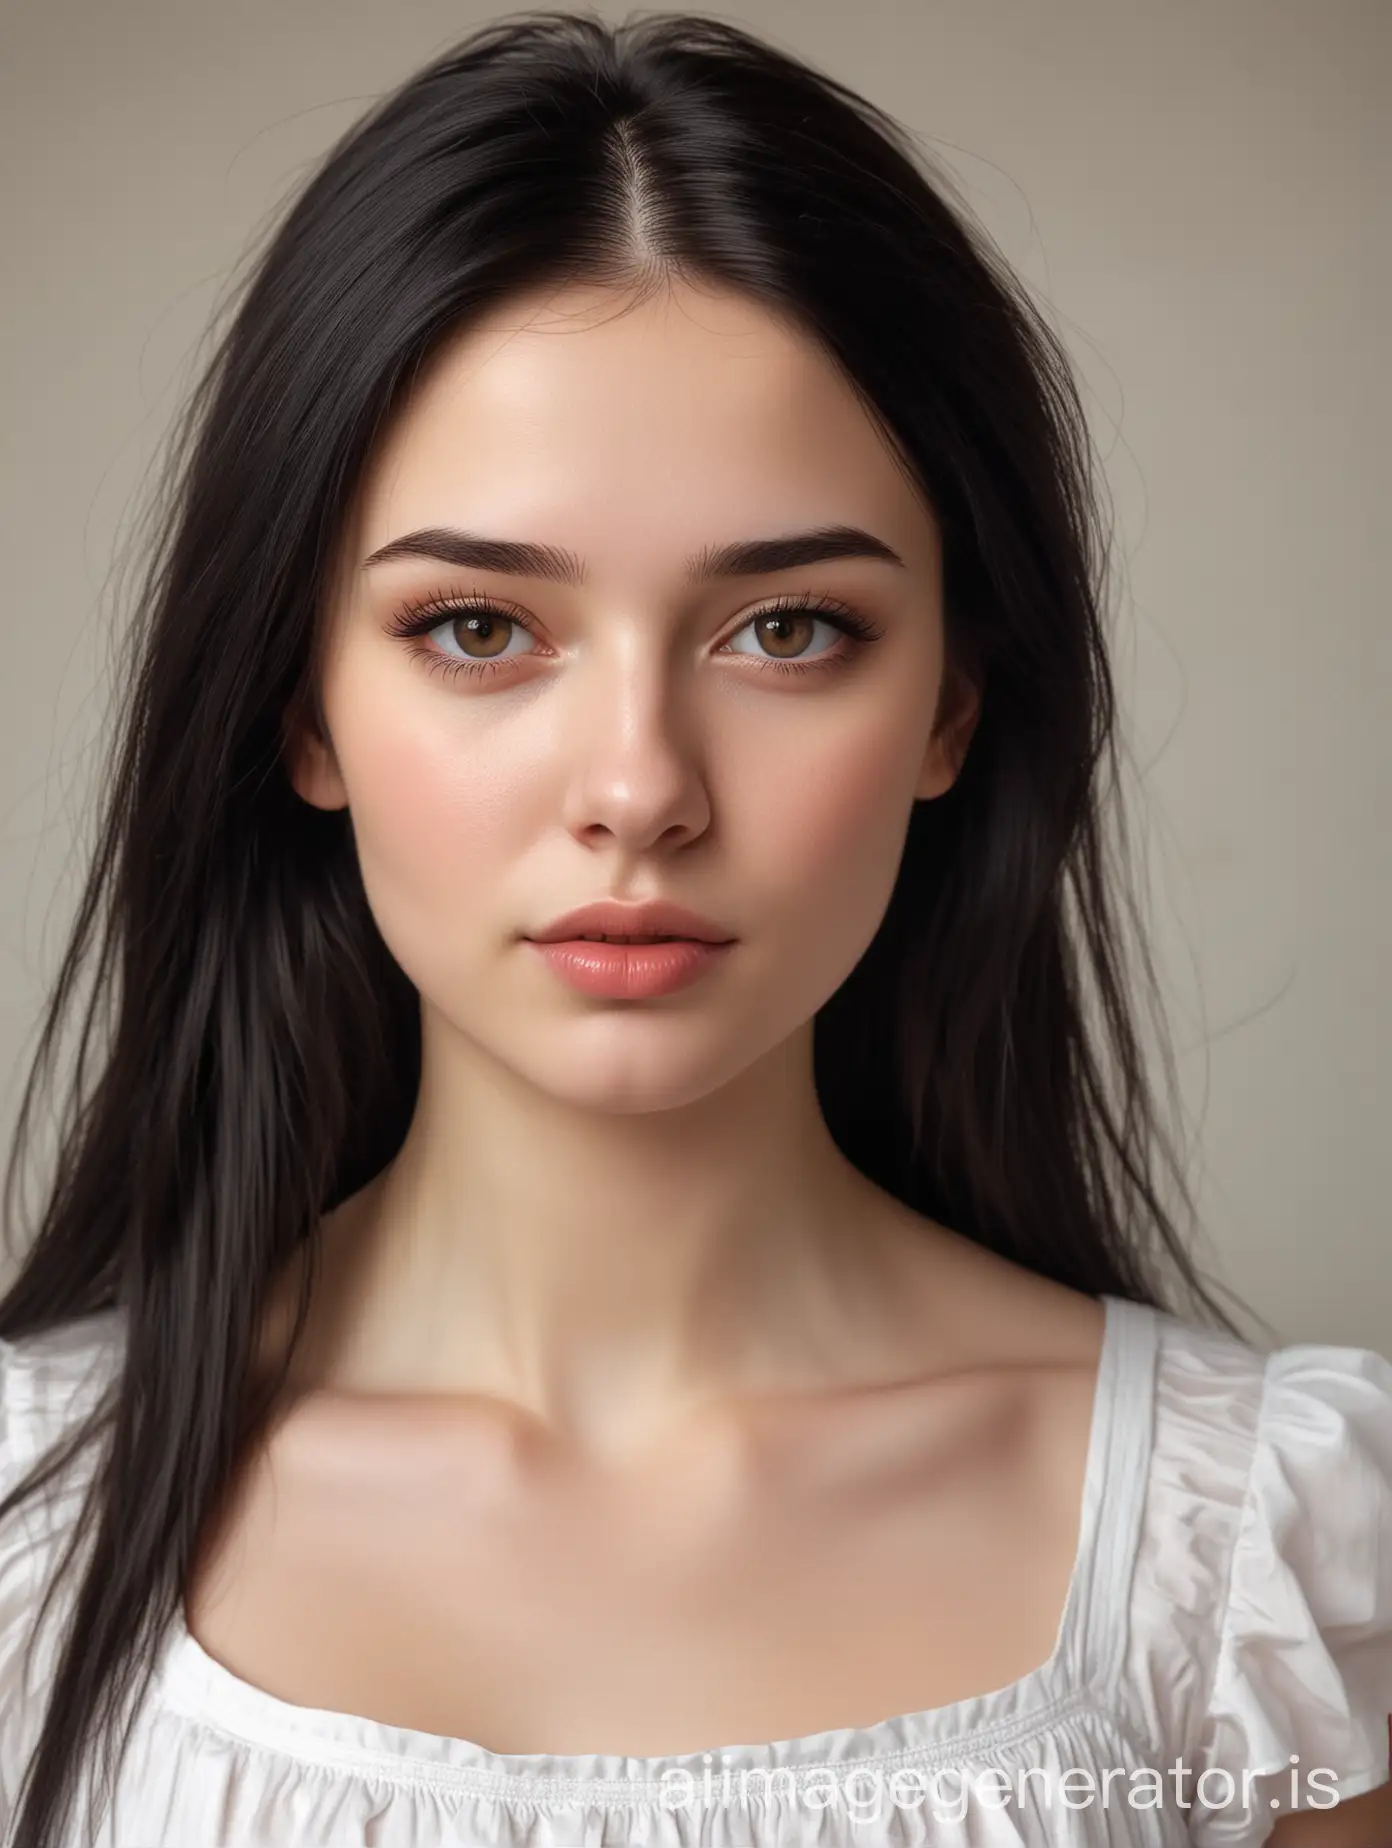 Realistic style half-length photo, a 18 years old white skin Russian girl. Oblong face. Black hair and eyebrow. Having a long straight hair, some hair droops beside her eyebrows. Brown eyes. Wearing a white dress.